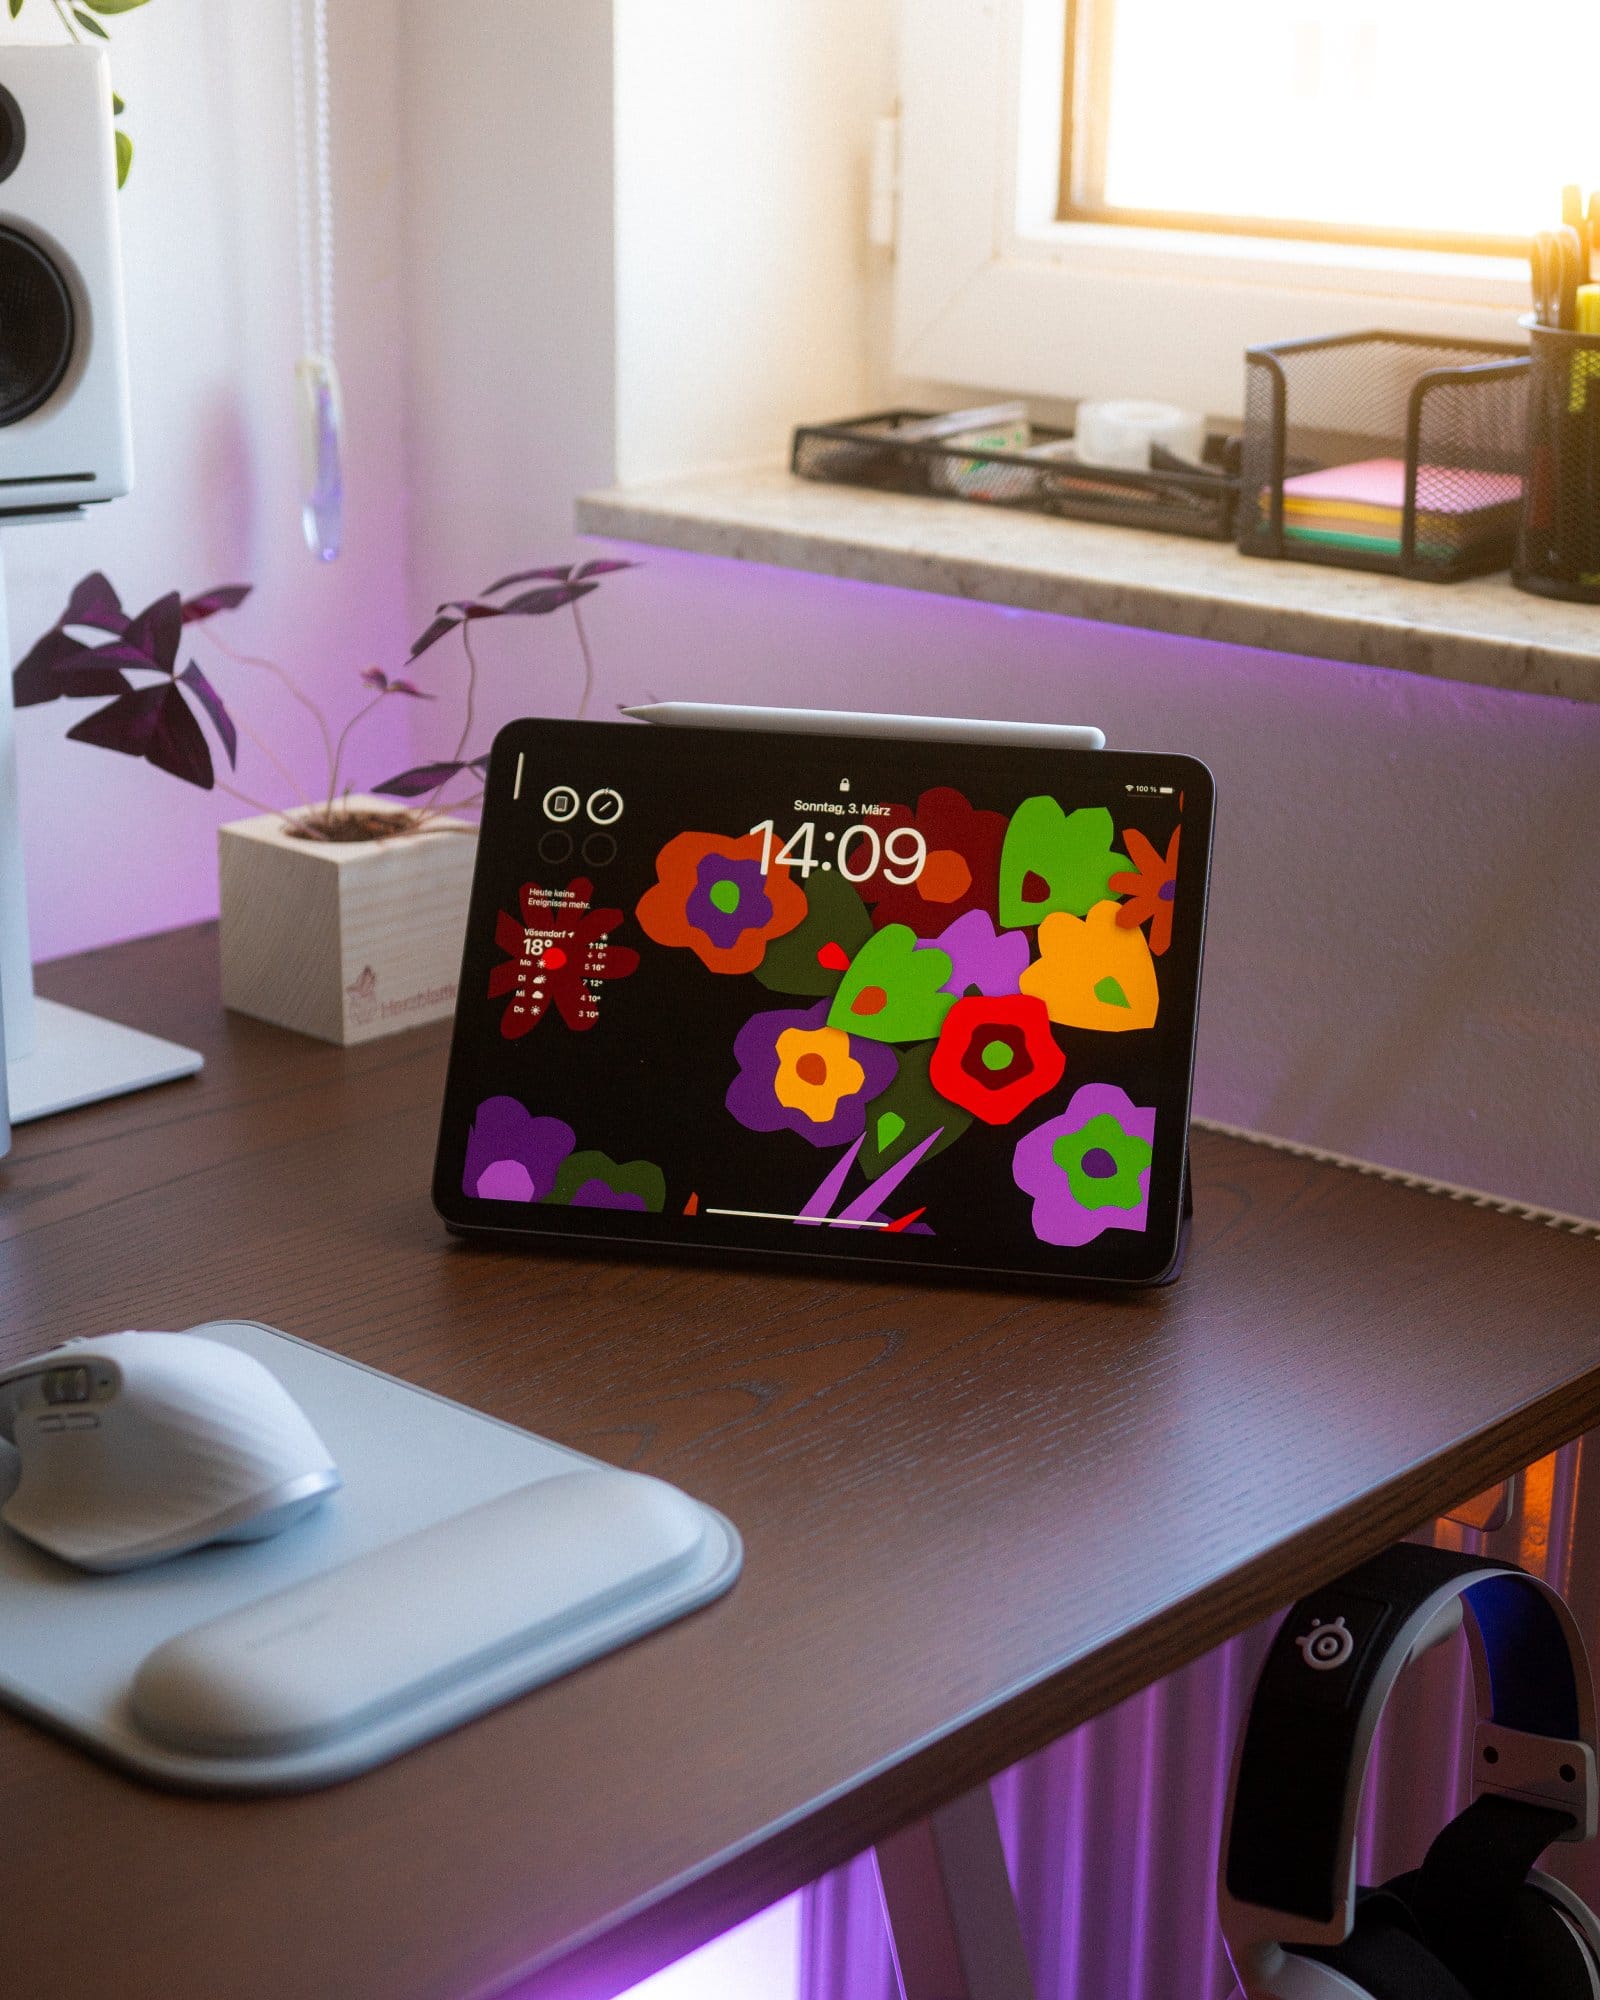 A tablet with a colourful floral display stands on a desk near an ergonomic mouse and mouse pad, with a backdrop of houseplants and office supplies